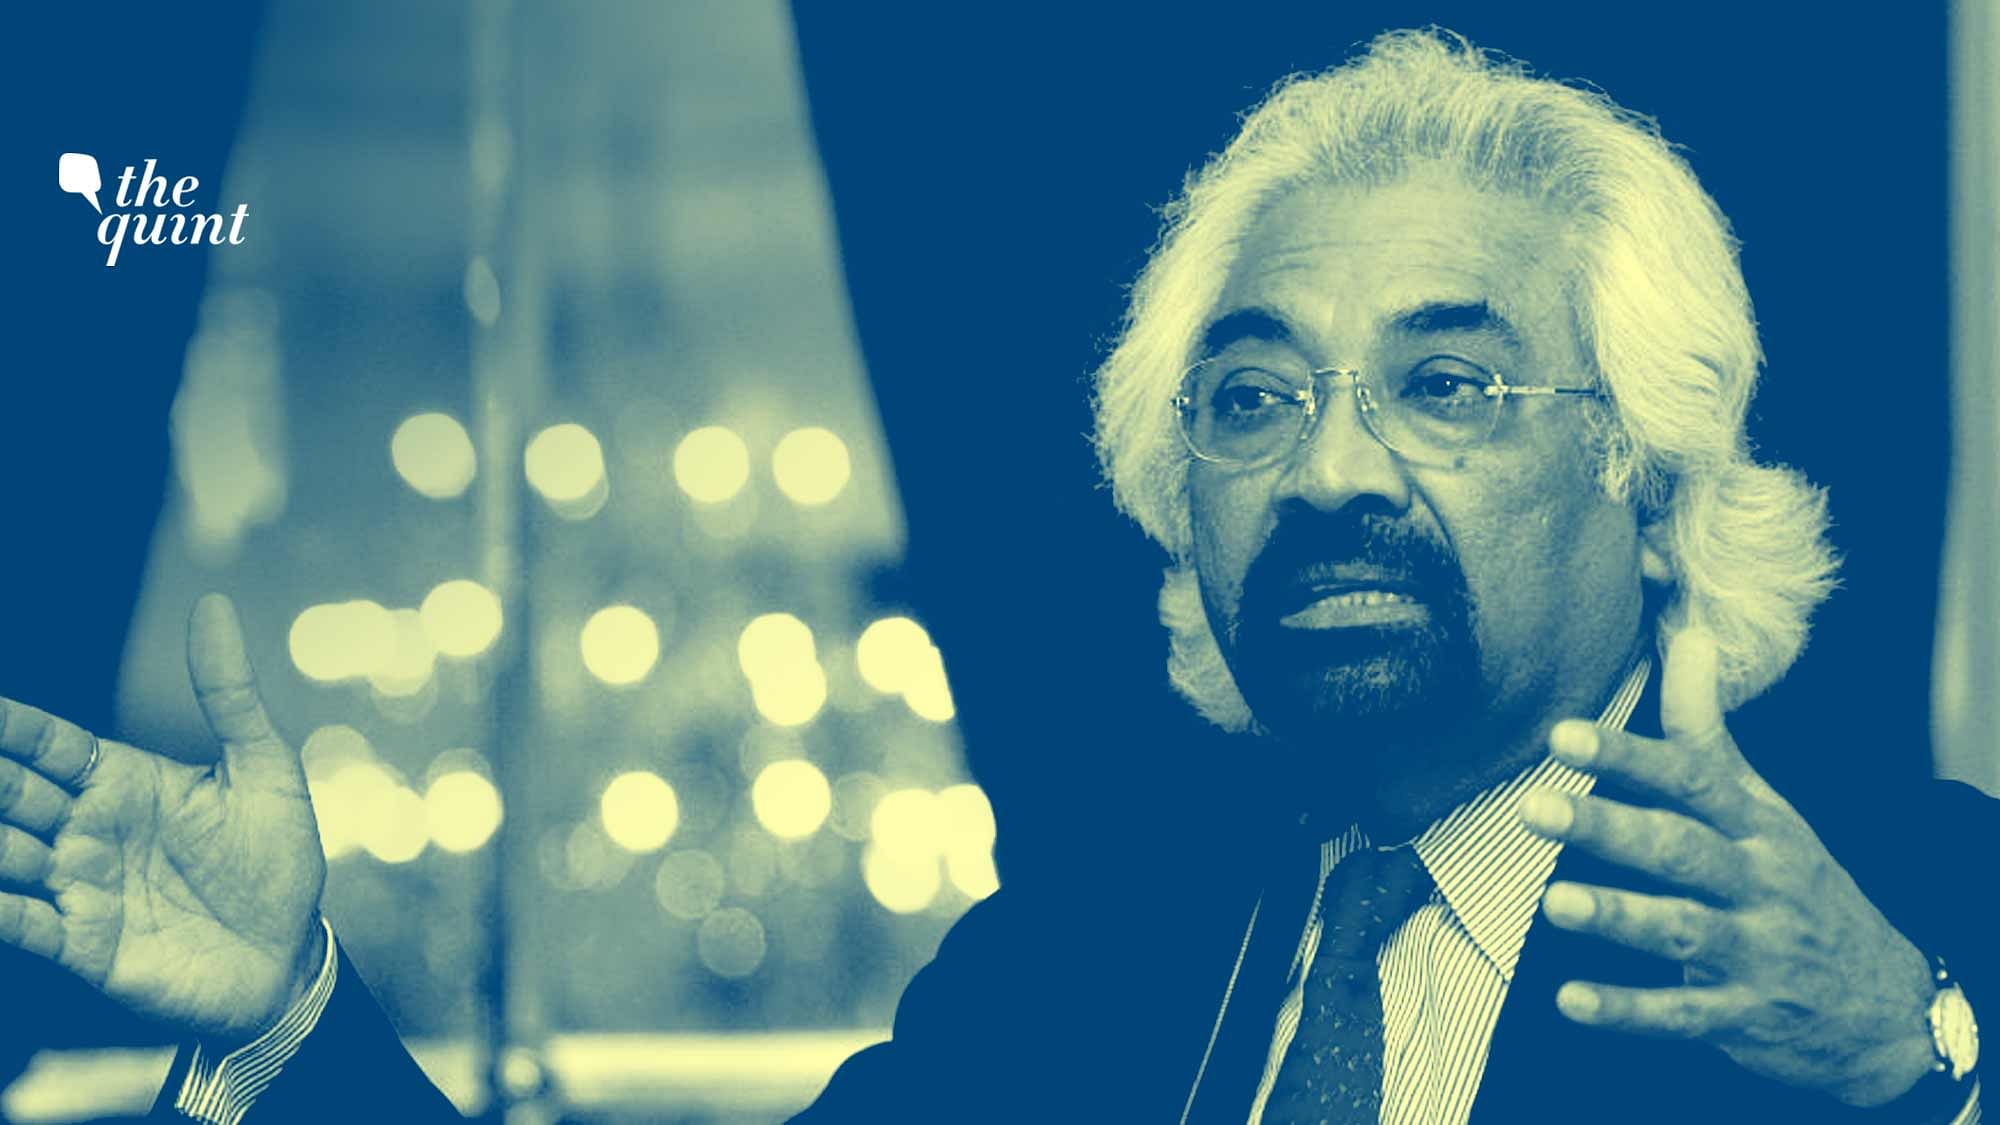 “If we are not ready for digital education, better bite the bullet &amp; say moratorium for a year,” says Pitroda.